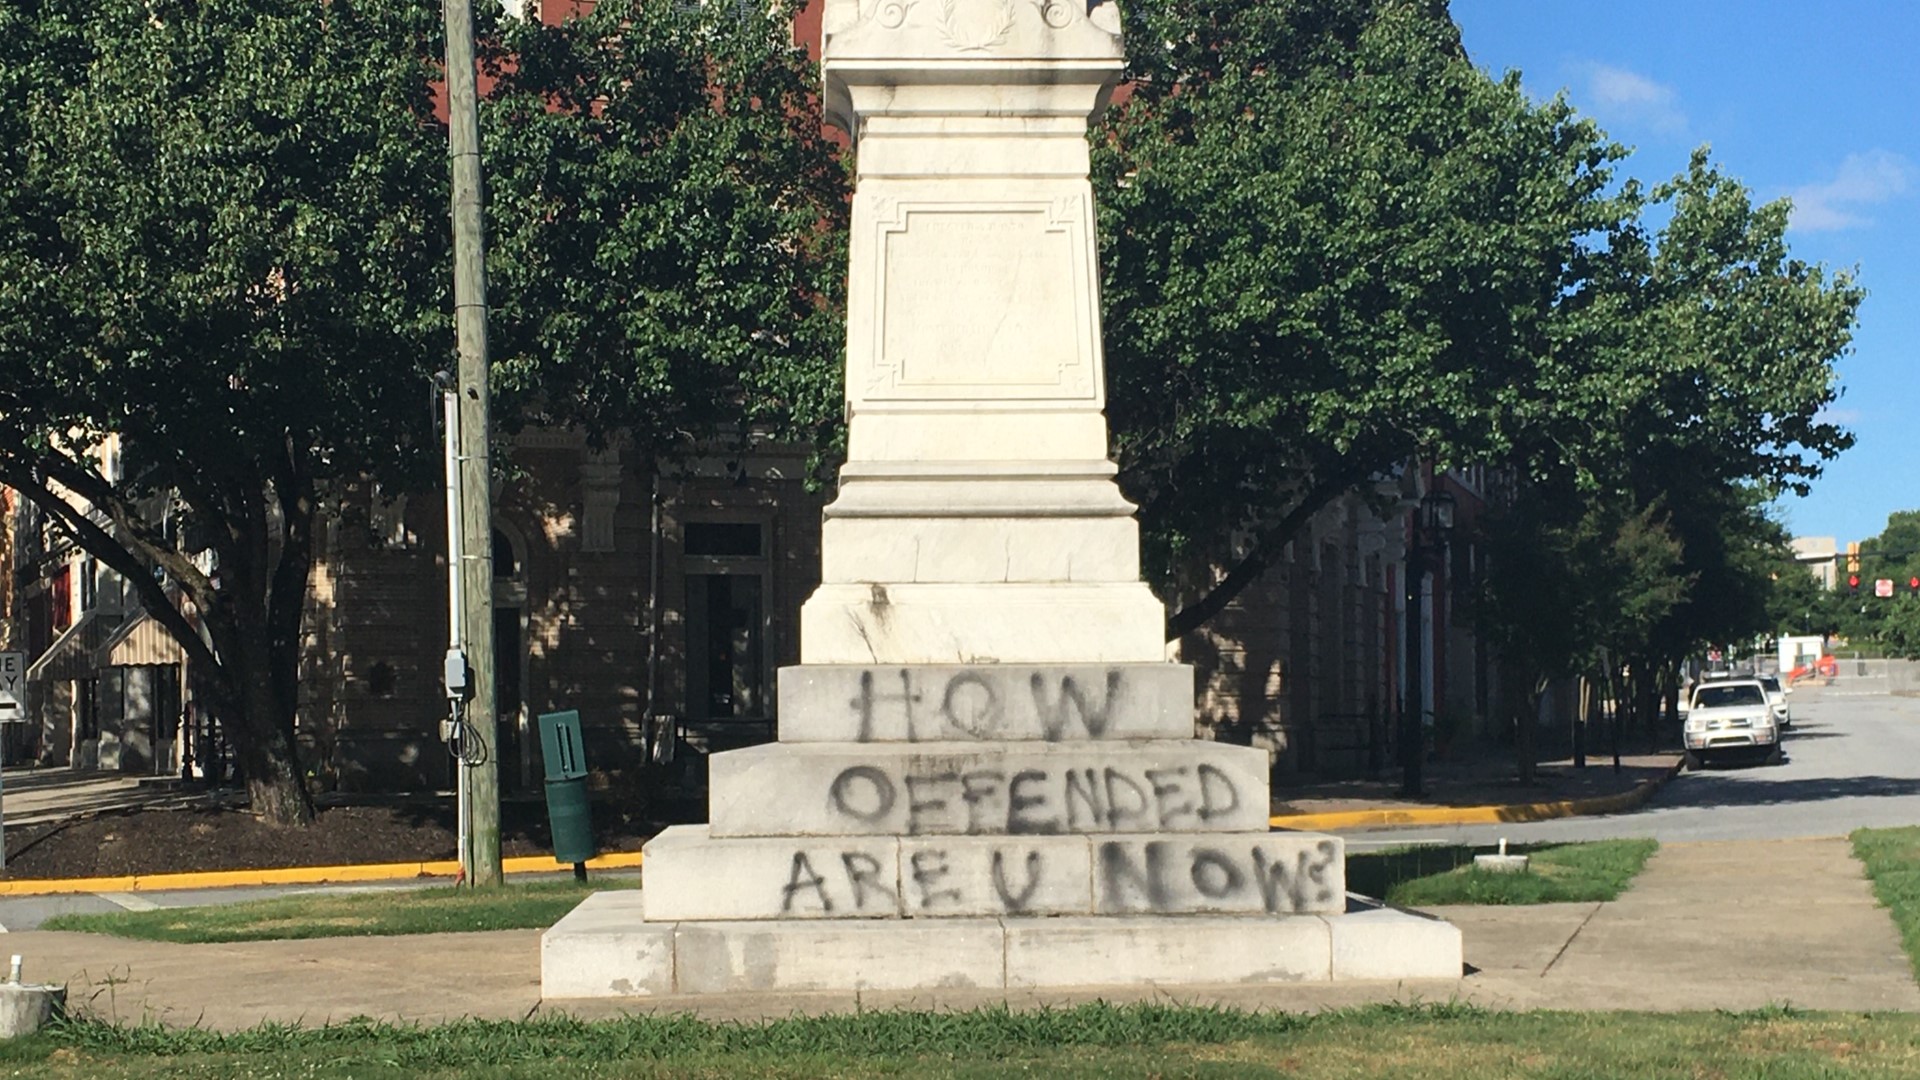 Crews are already cleaning up a message that reads 'How offended are you now?'